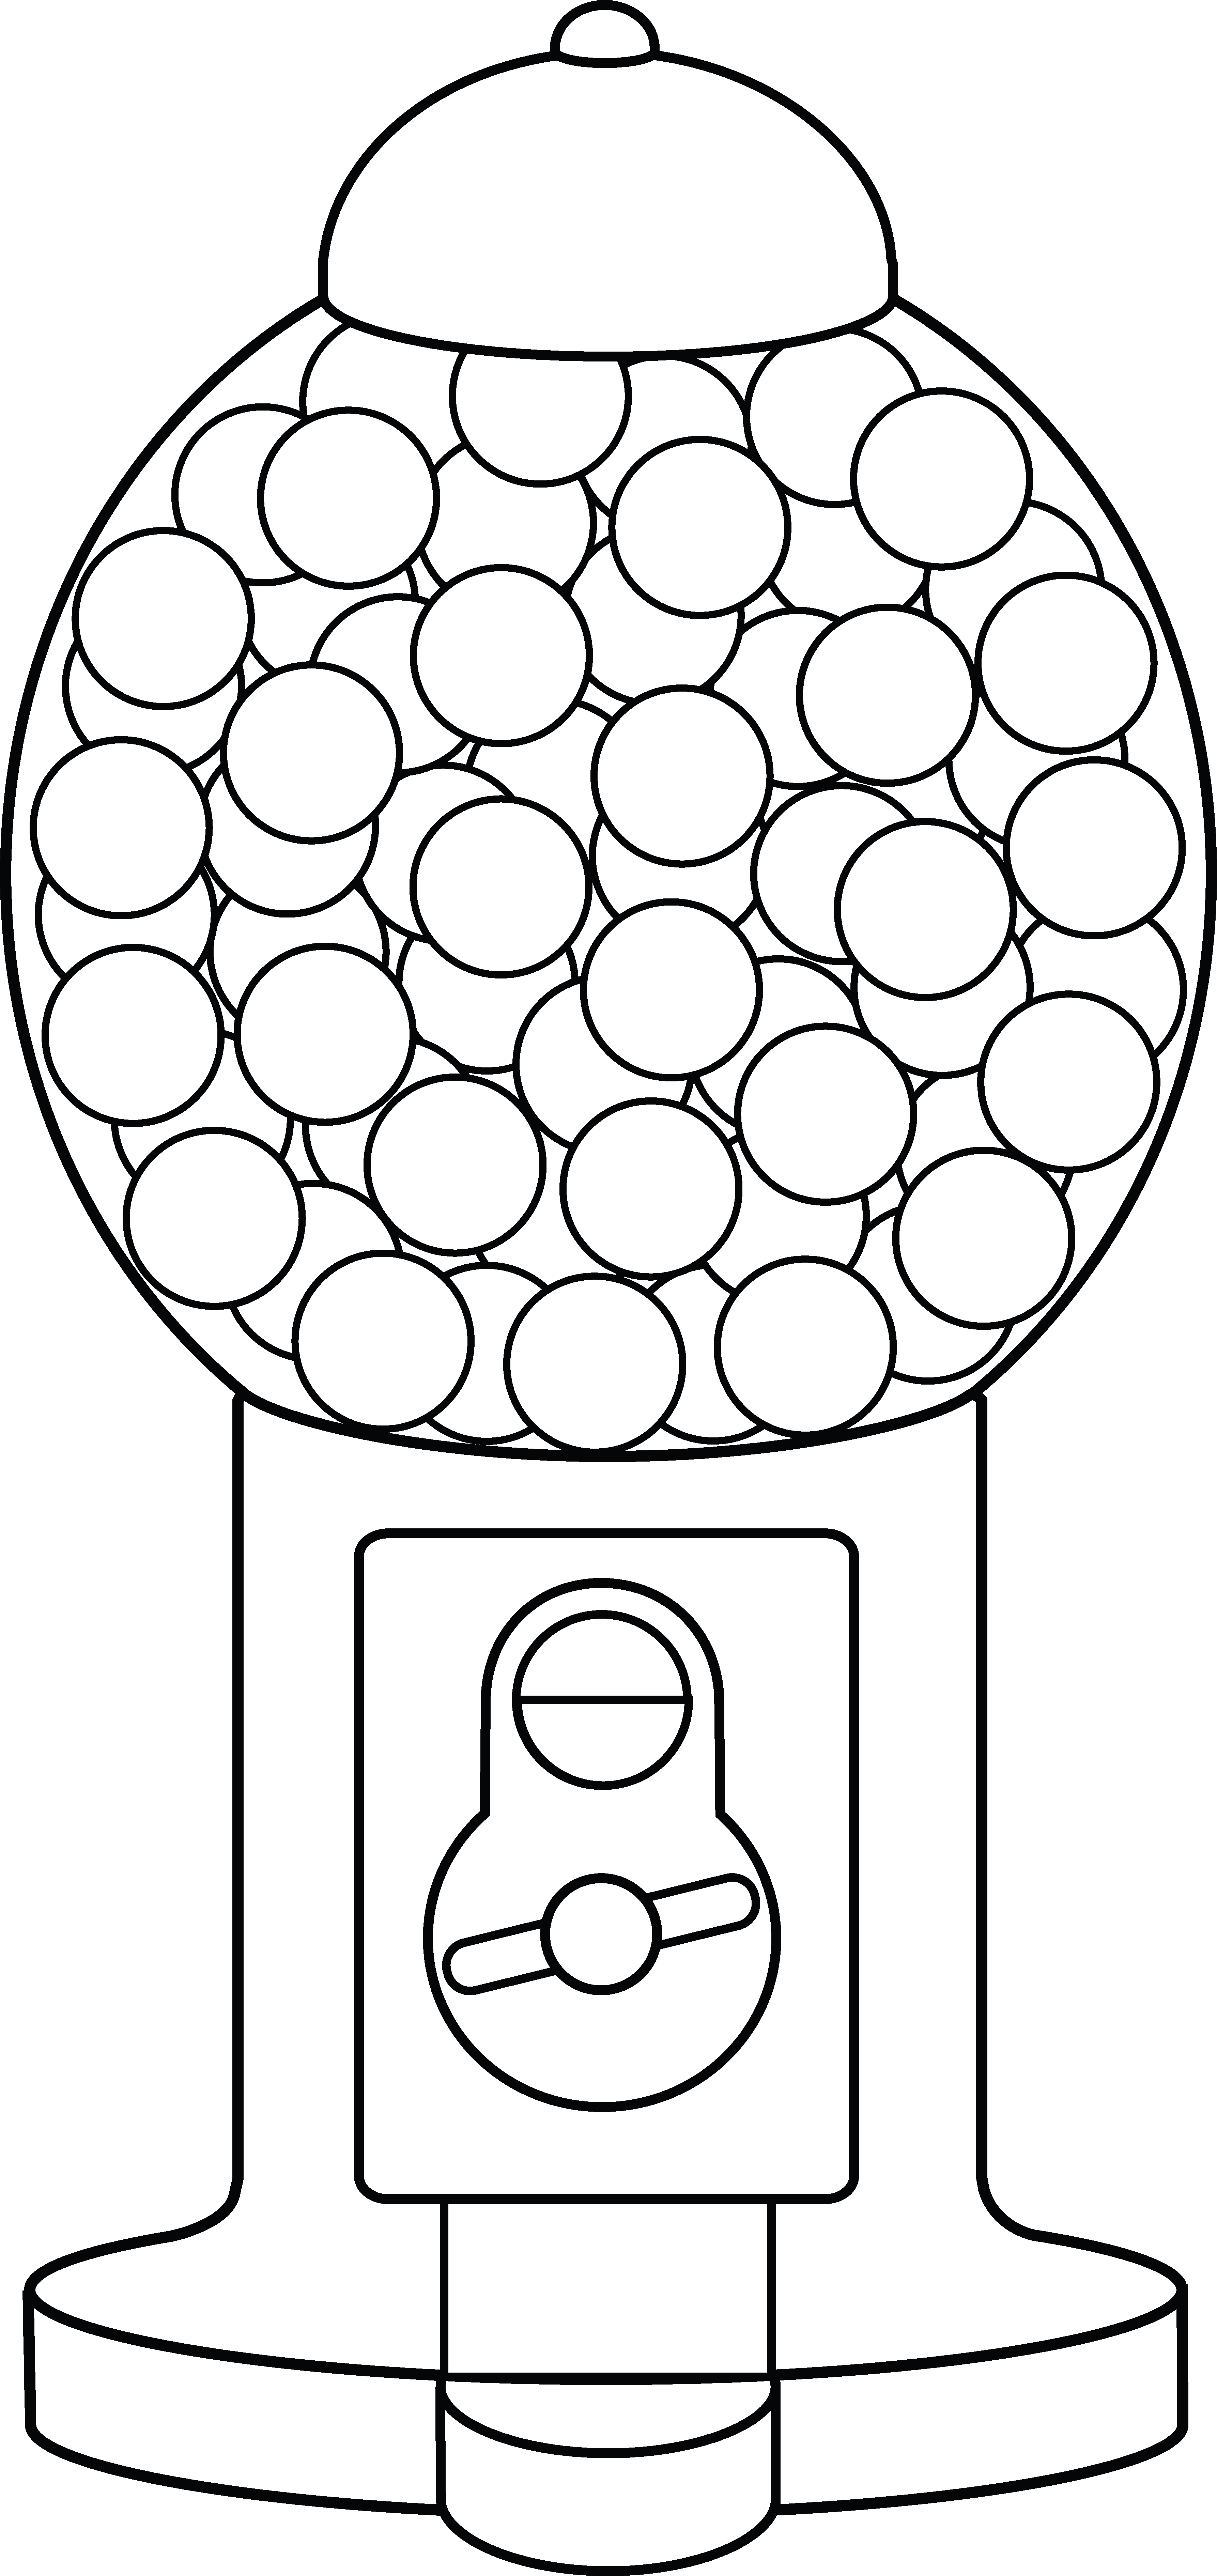 gumball-machine-coloring-pages-coloring-home